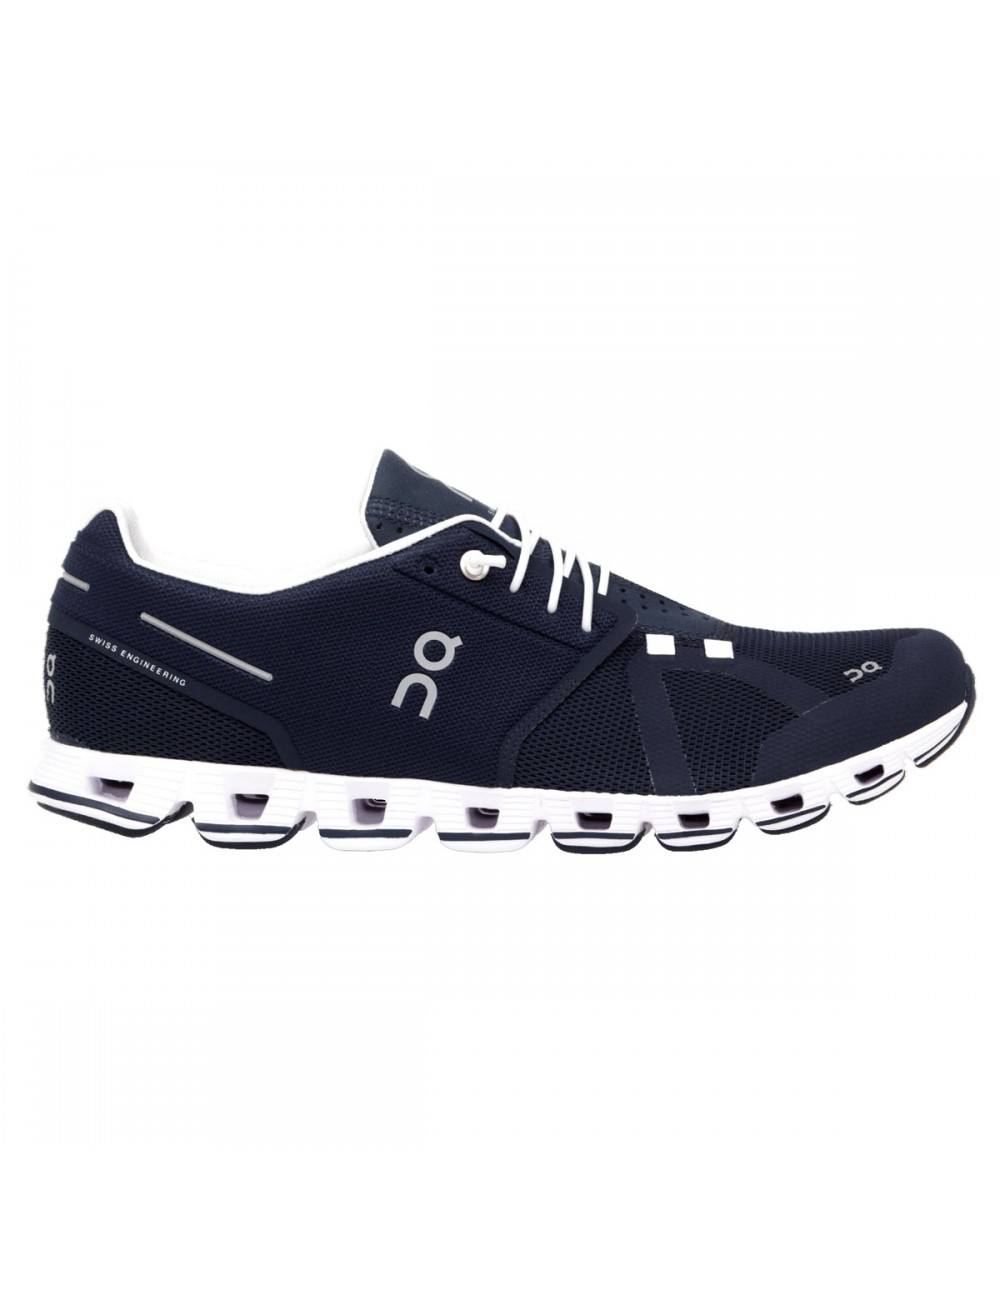 ON Cloud Shoe - Navy/White